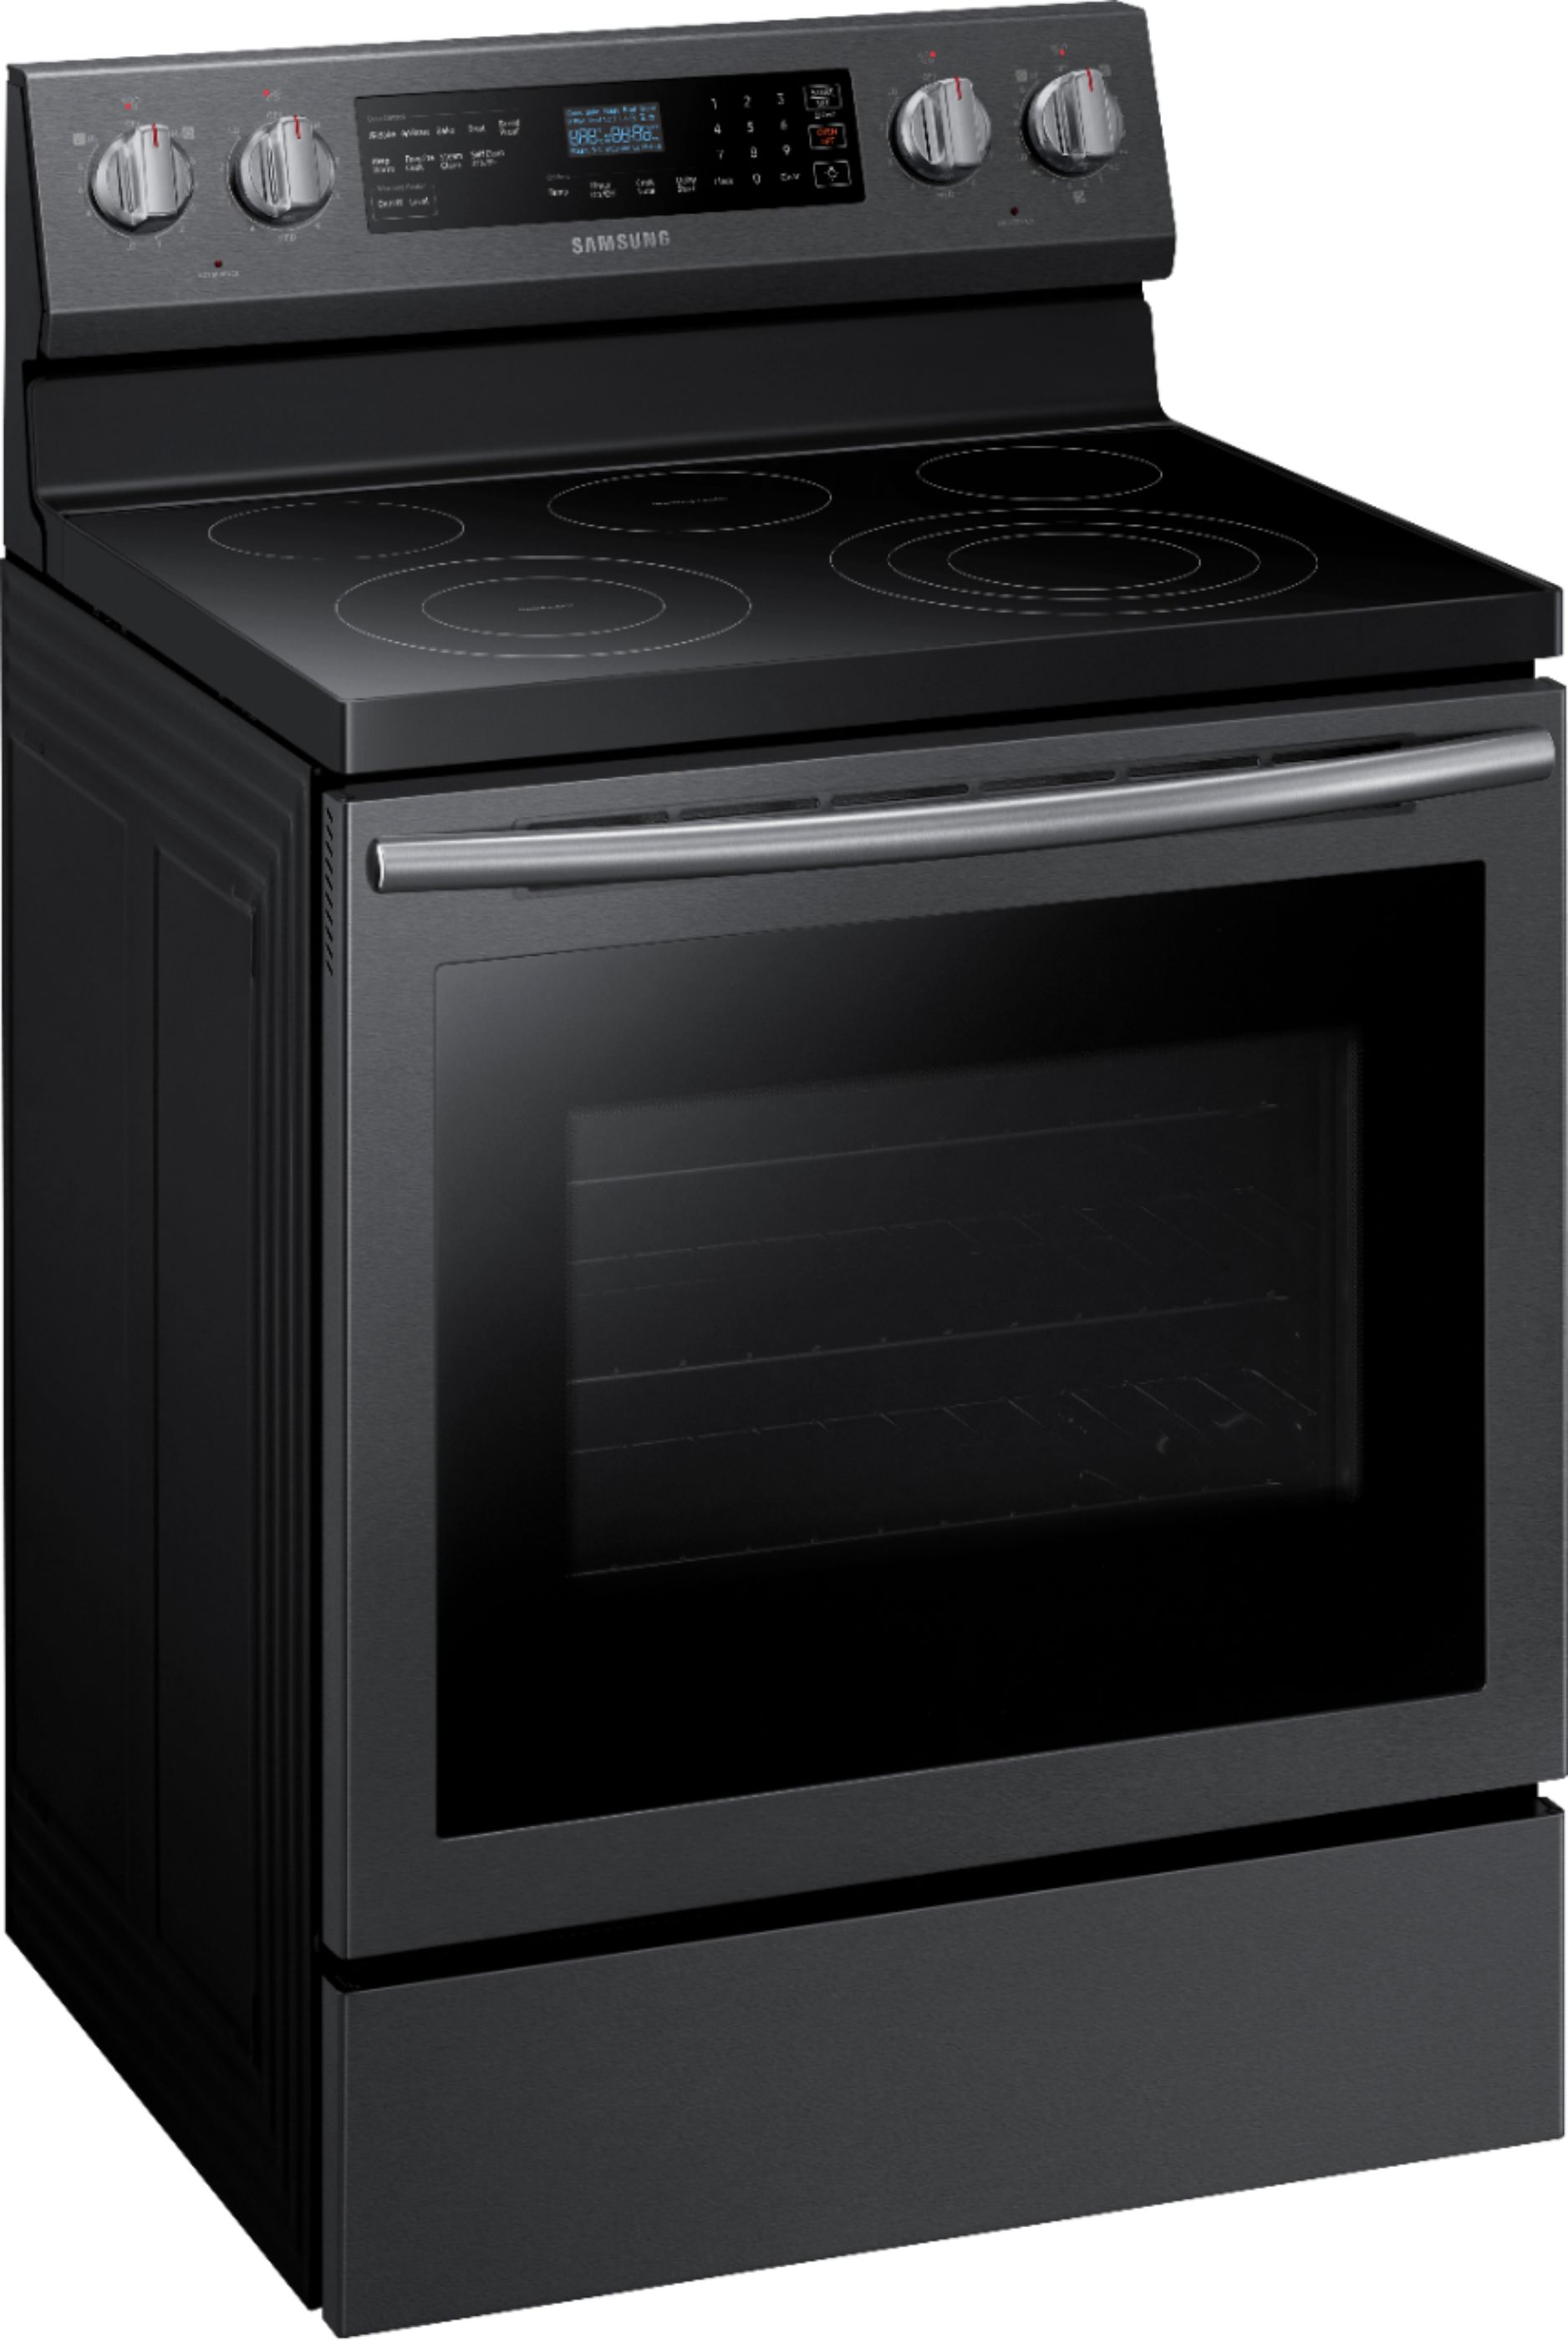 Angle View: Samsung - 5.9 Cu. Ft. Self-Cleaning Freestanding Fingerprint Resistant Electric Convection Range - Black Stainless Steel